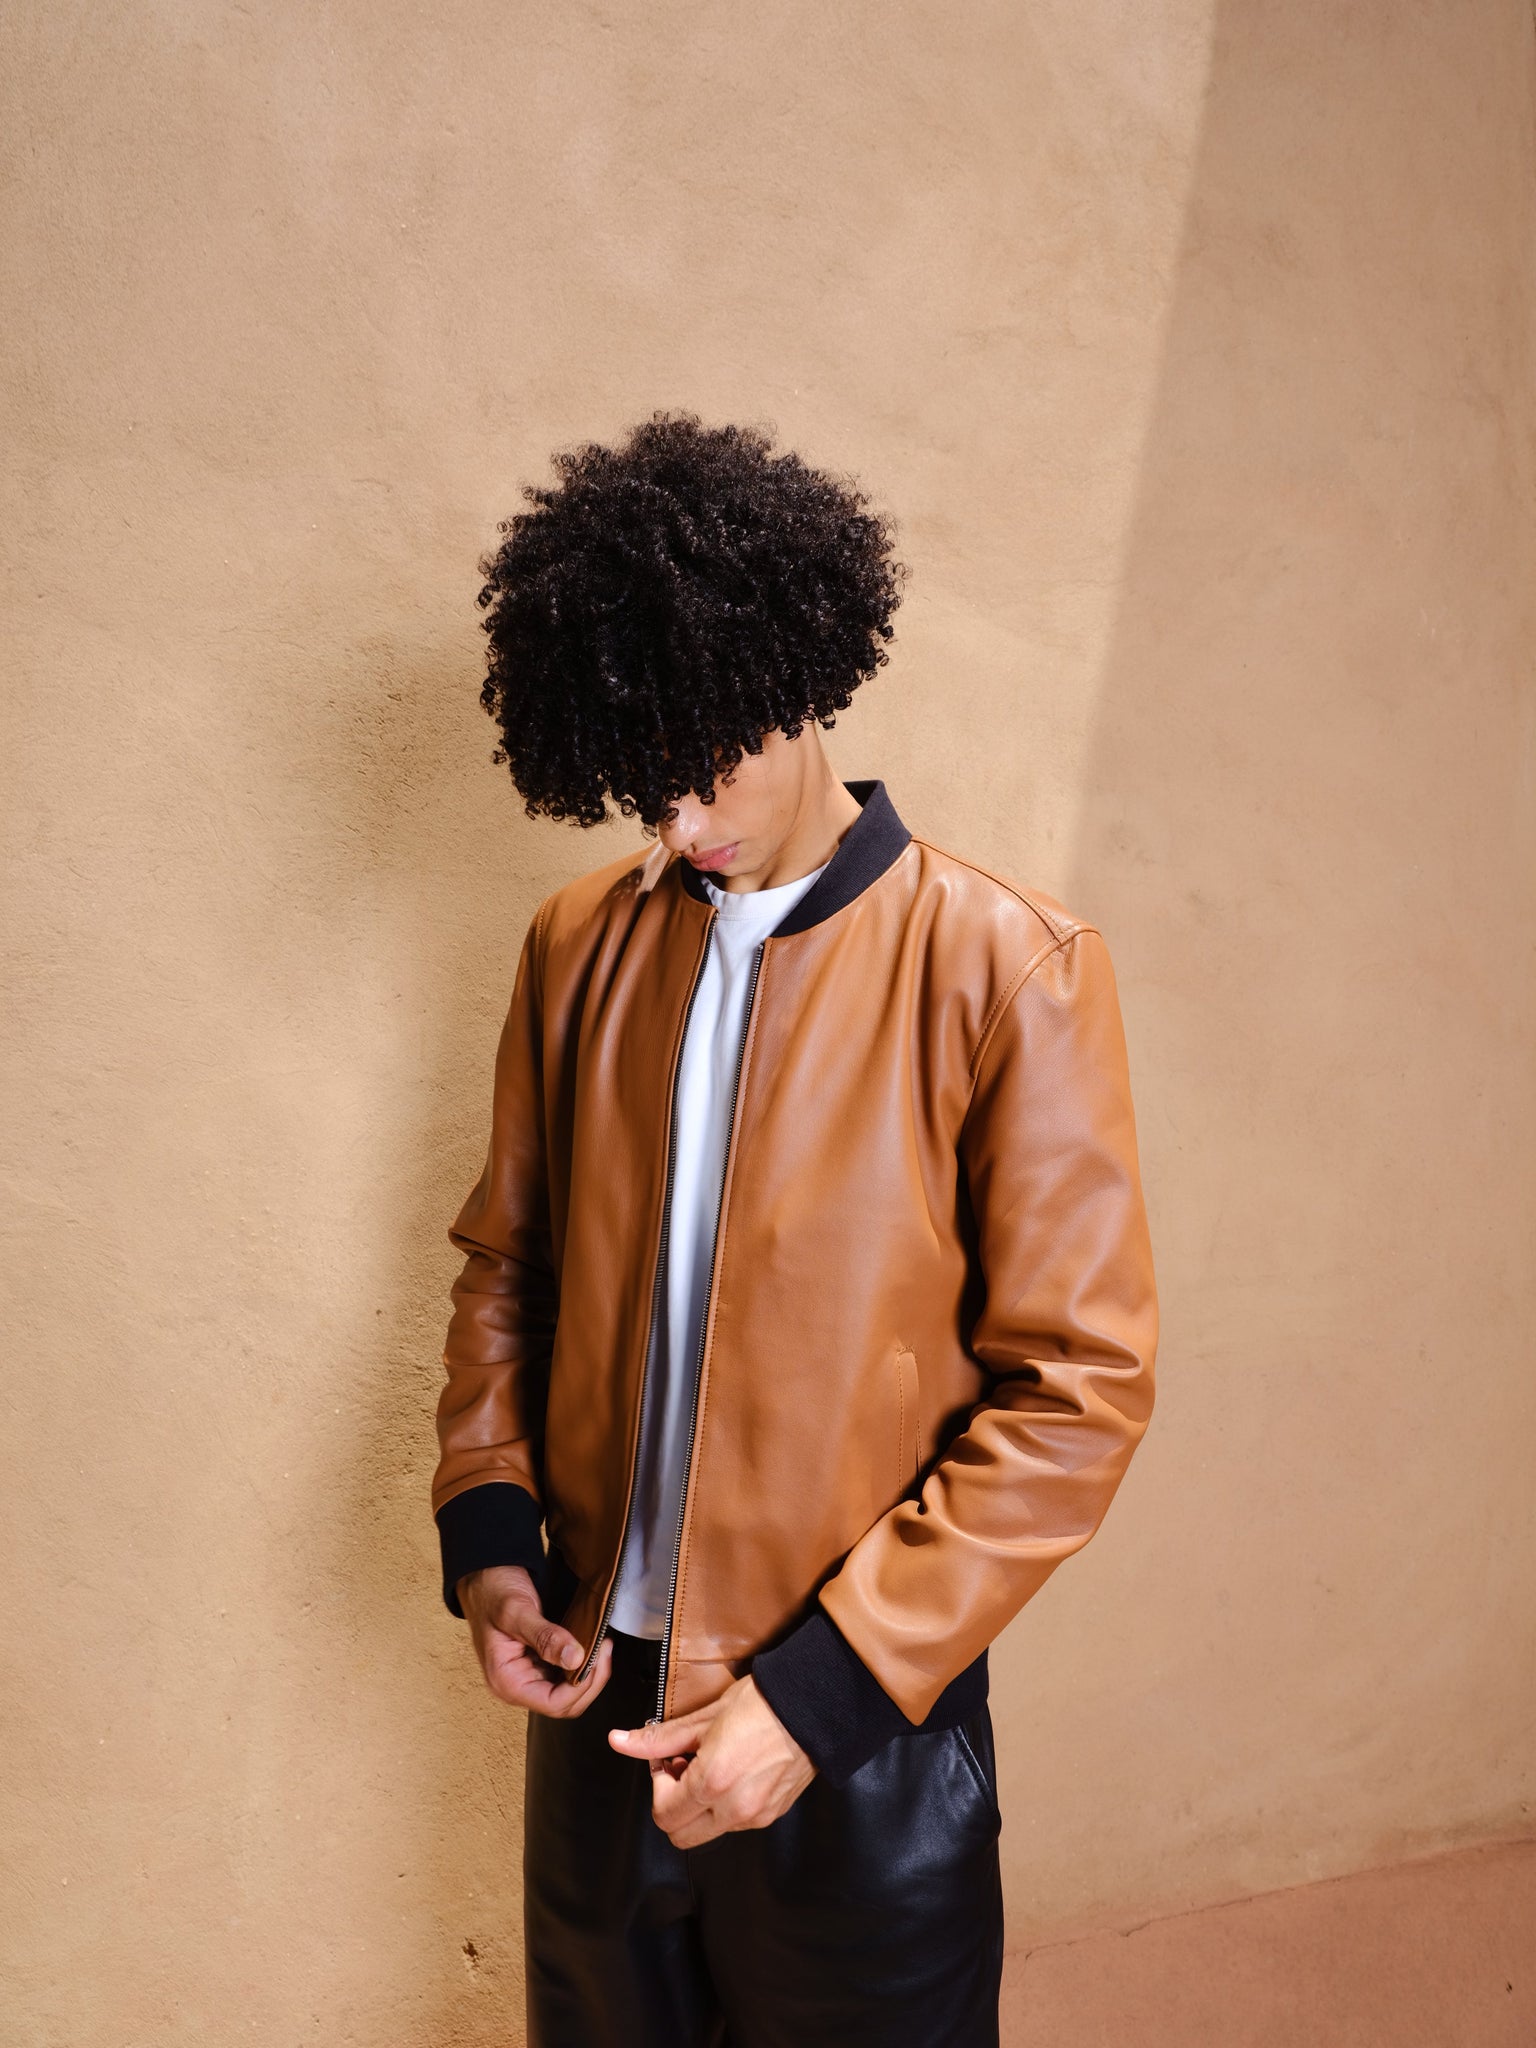 The leather bomber